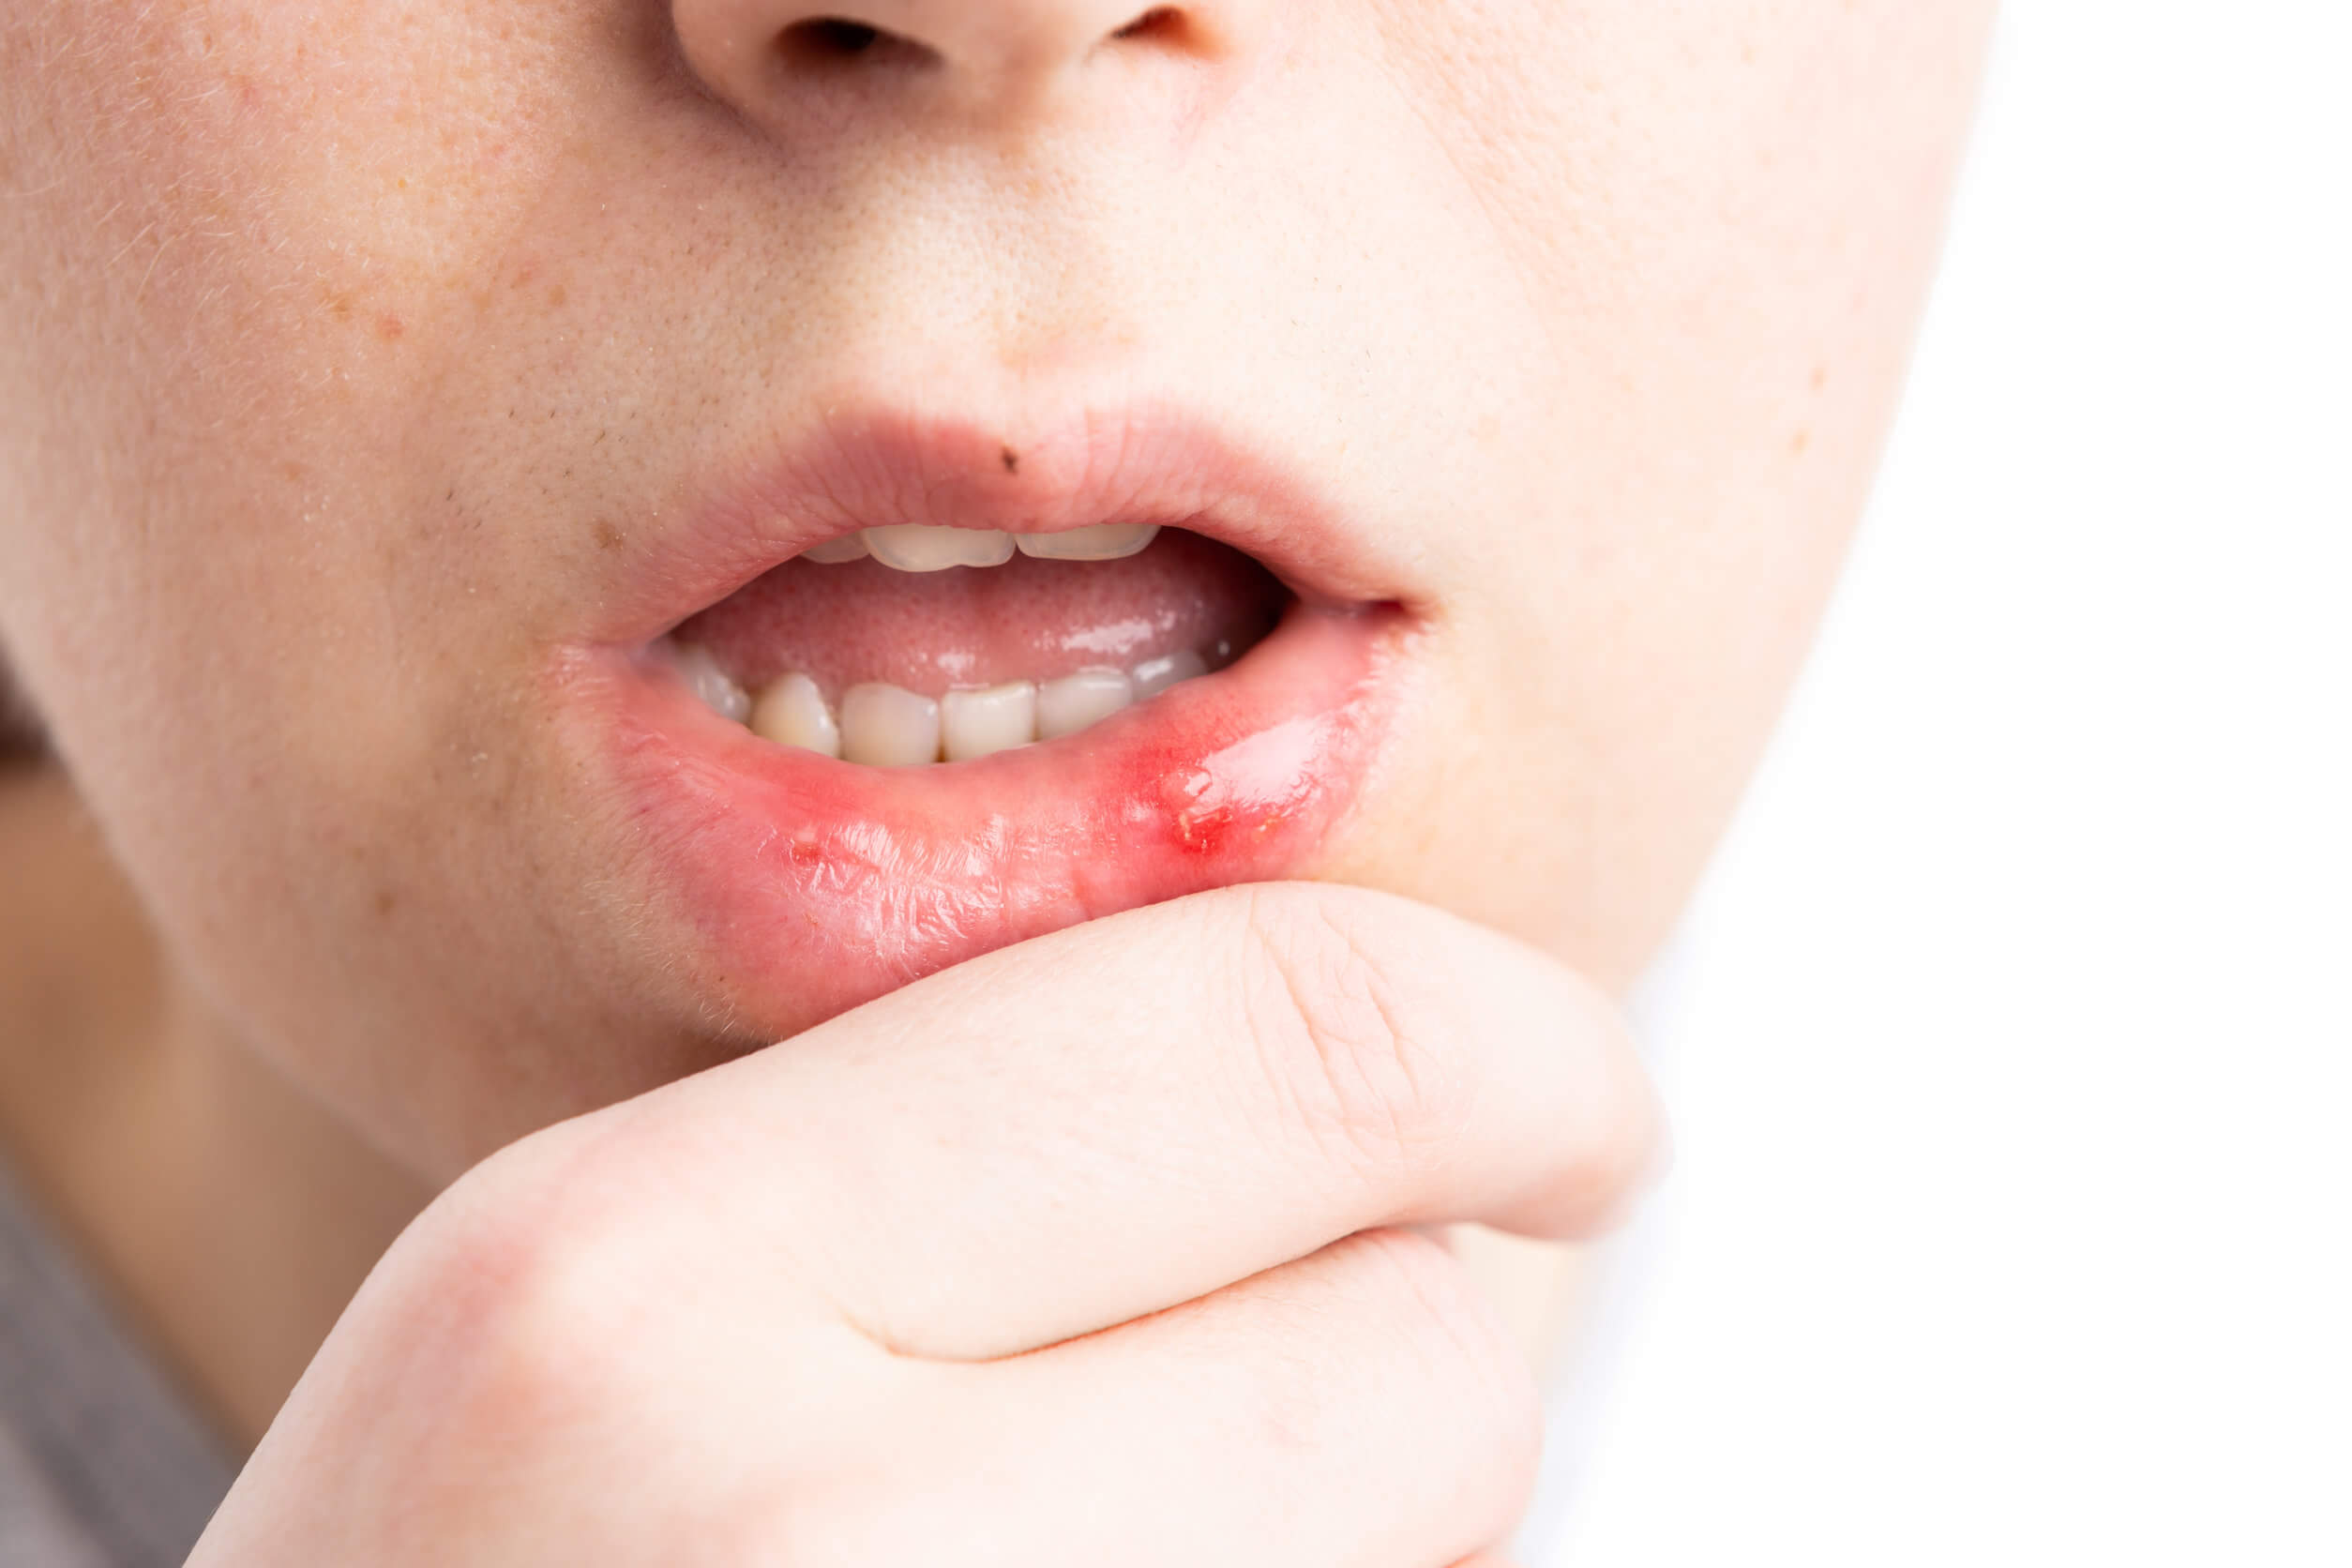 To heal mouth ulcers, topical products may be required.